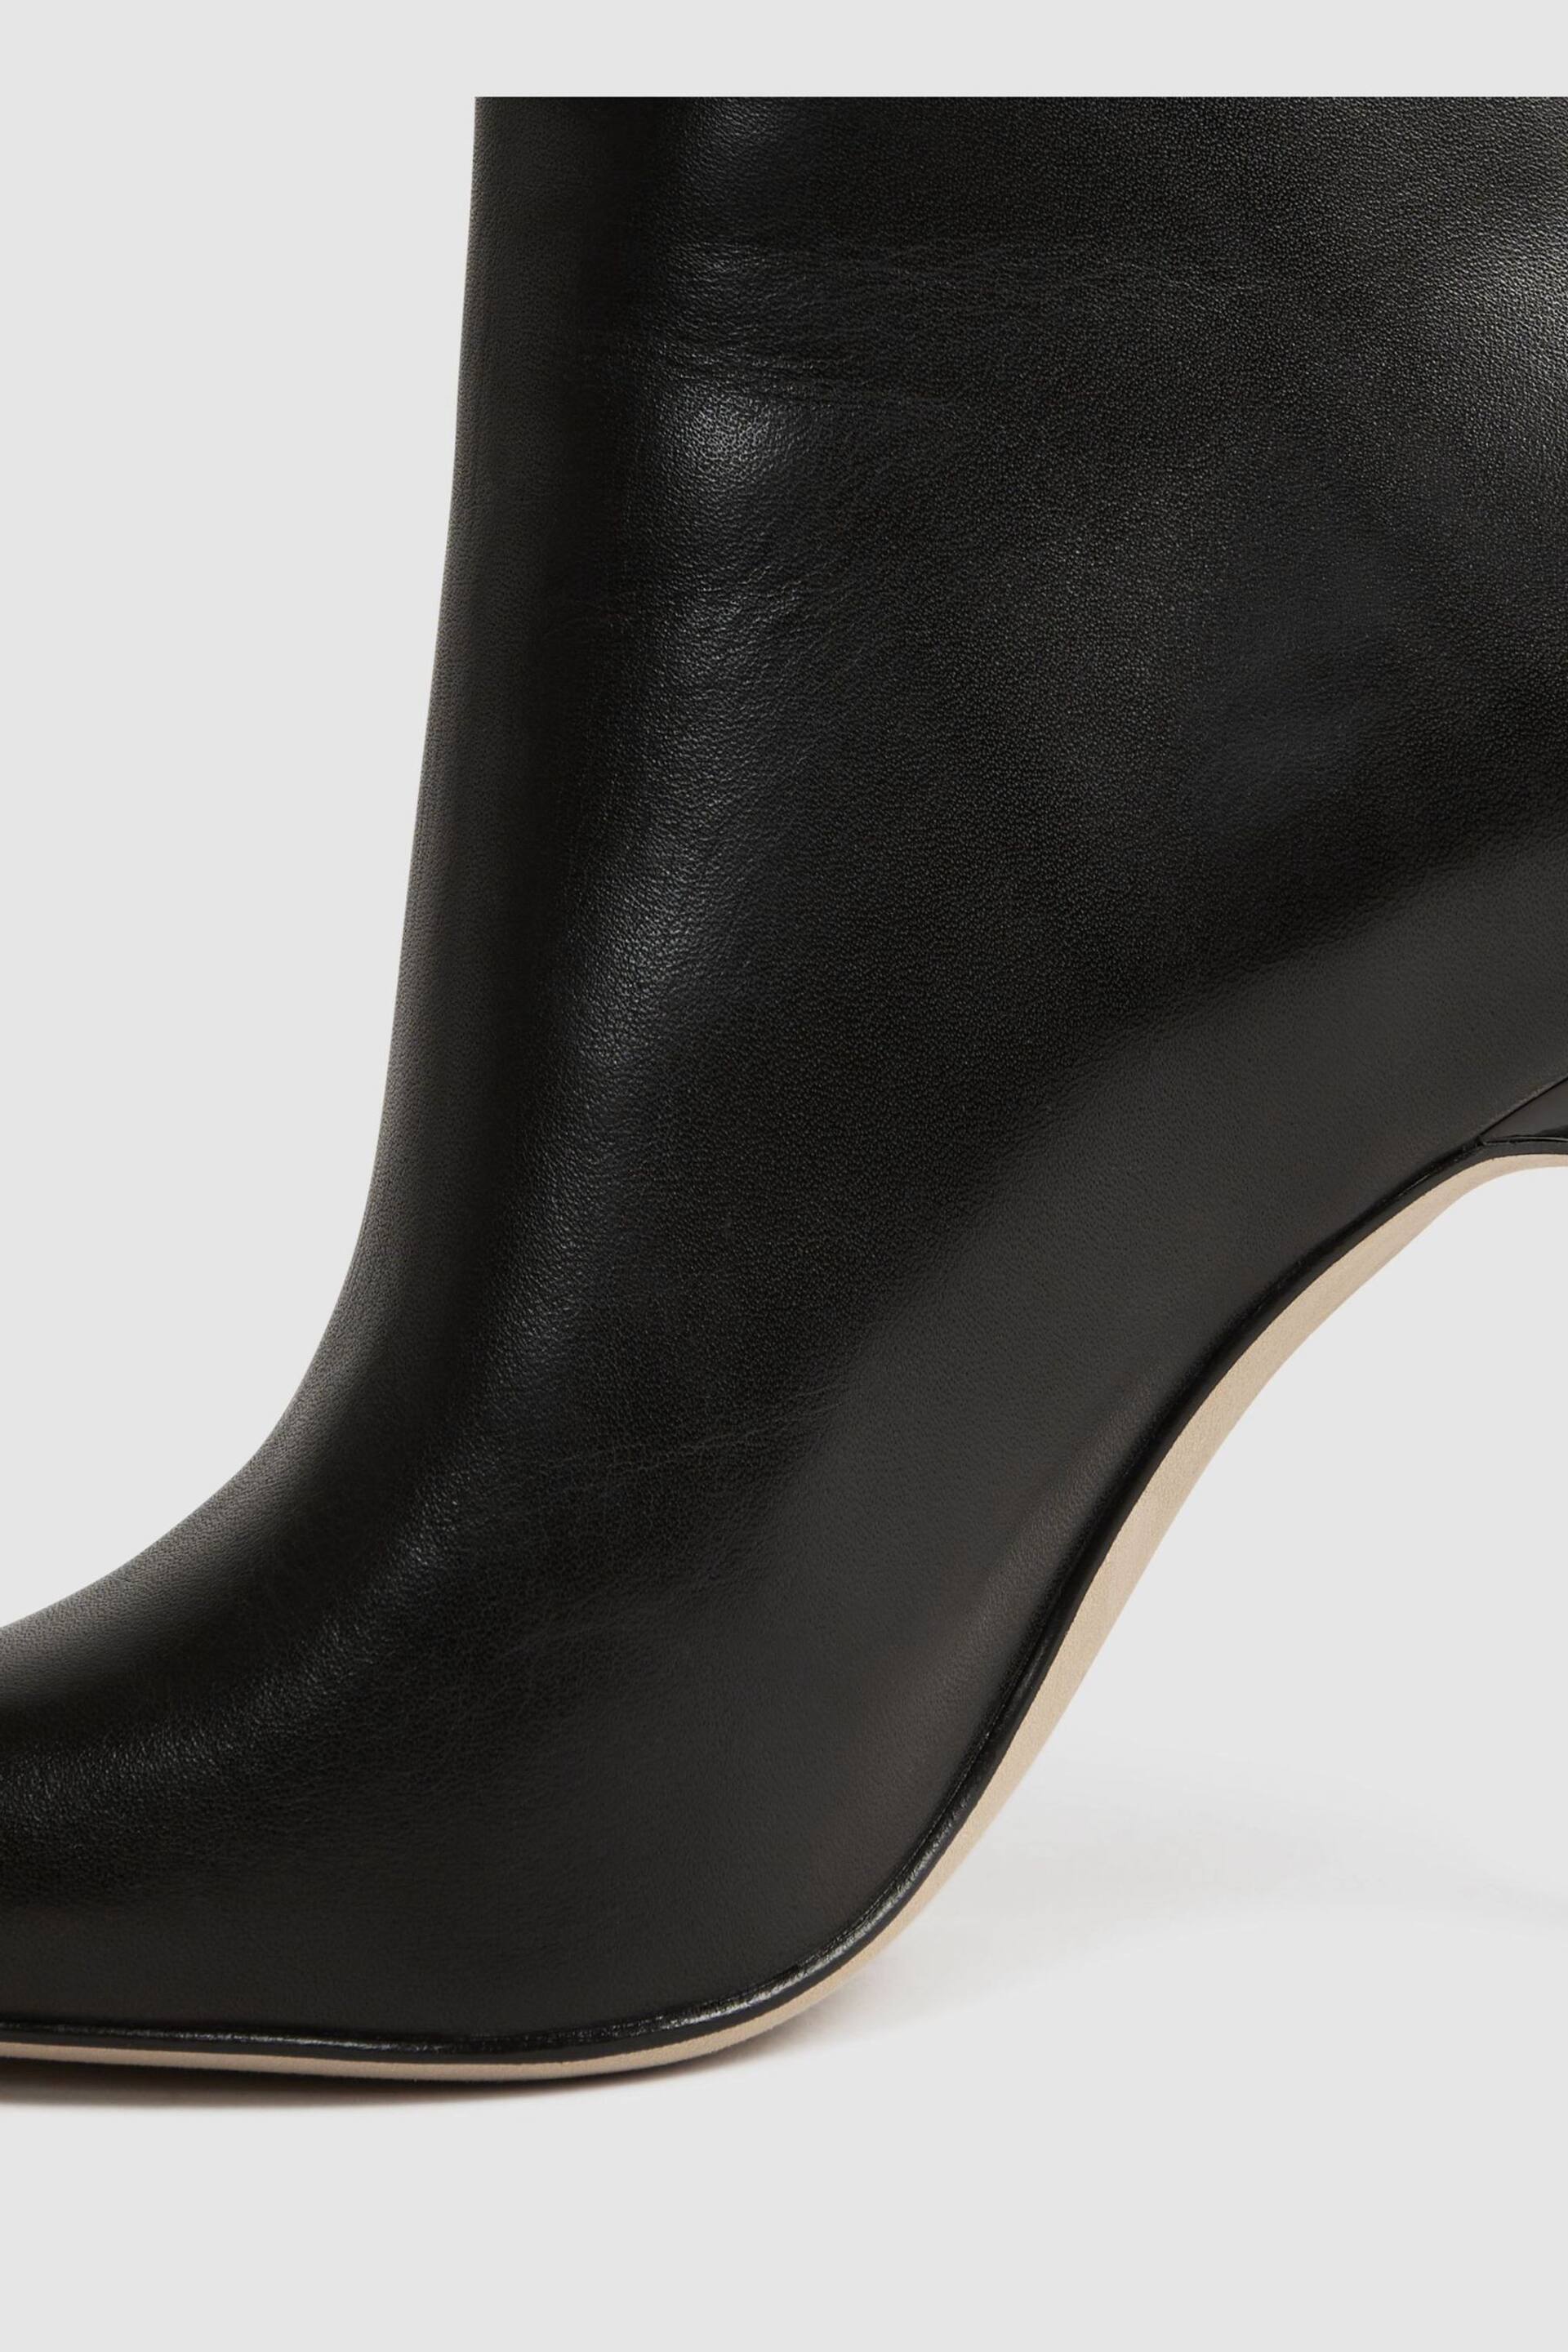 Reiss Black Lyra Signature Leather Ankle Boots - Image 5 of 5